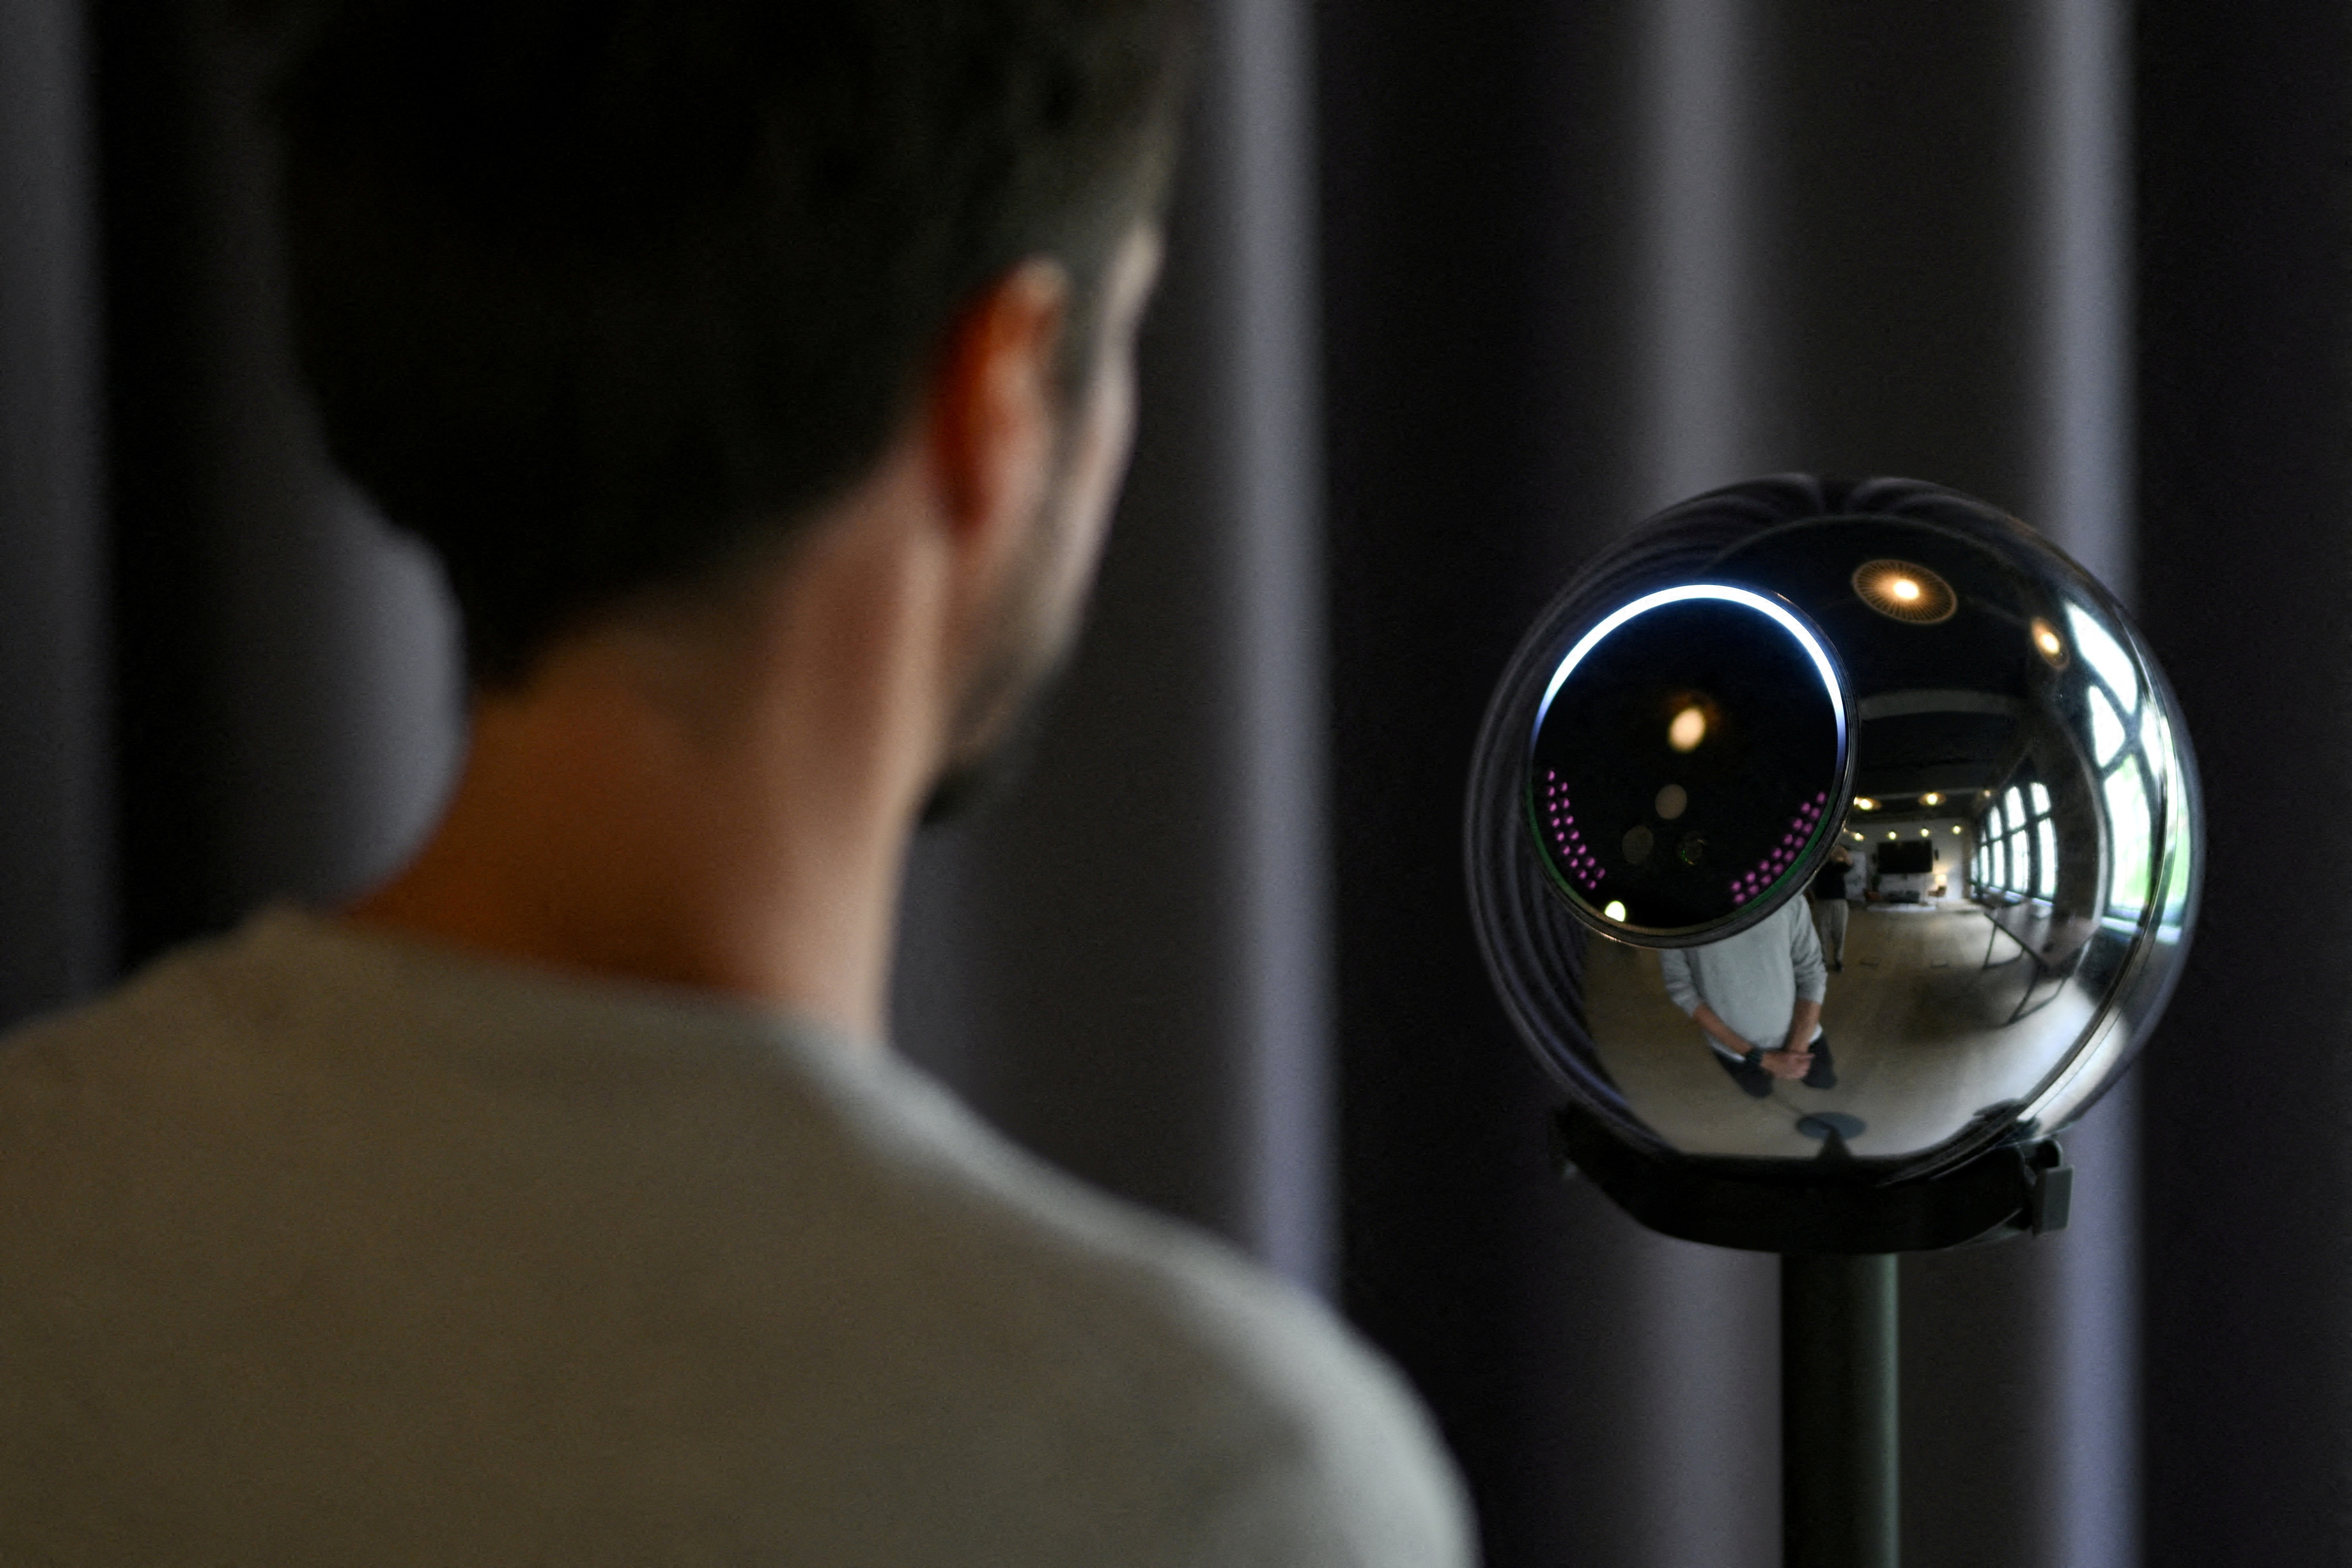 Digital coins in exchange for an iris scan: biometric imaging device Orb